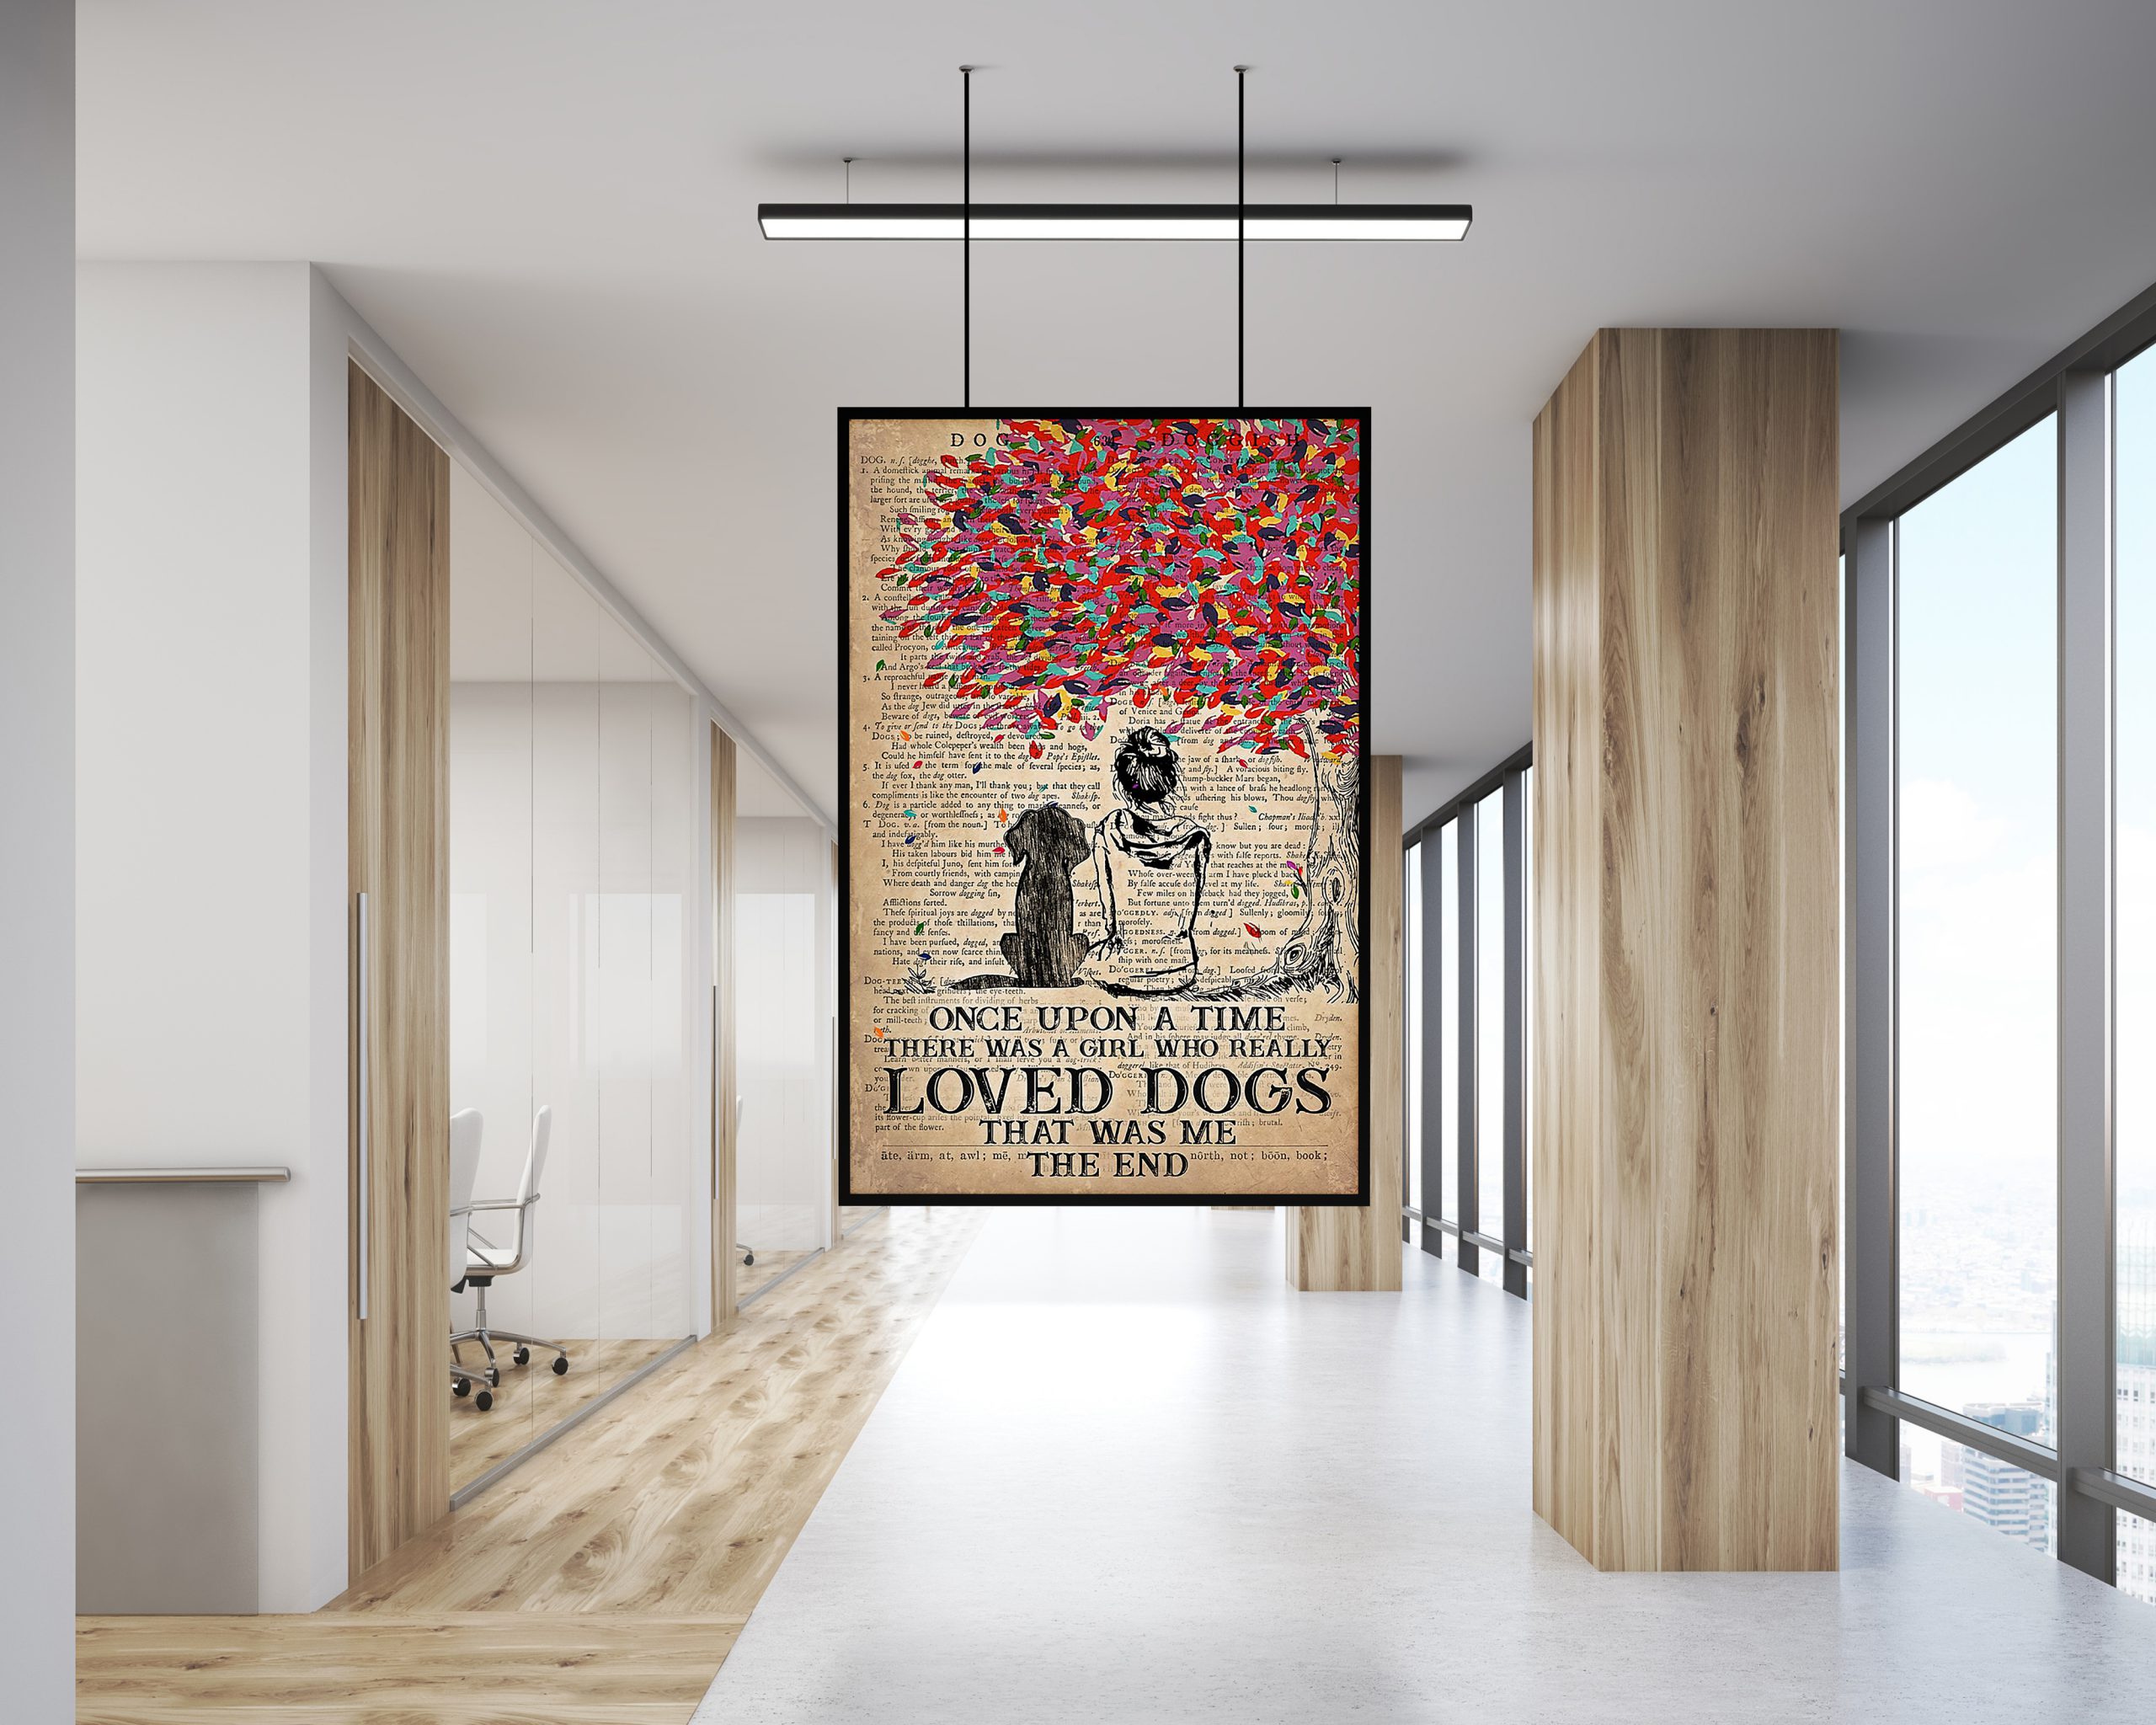 There was a girl who really loved dogs that was me the end canvas poster